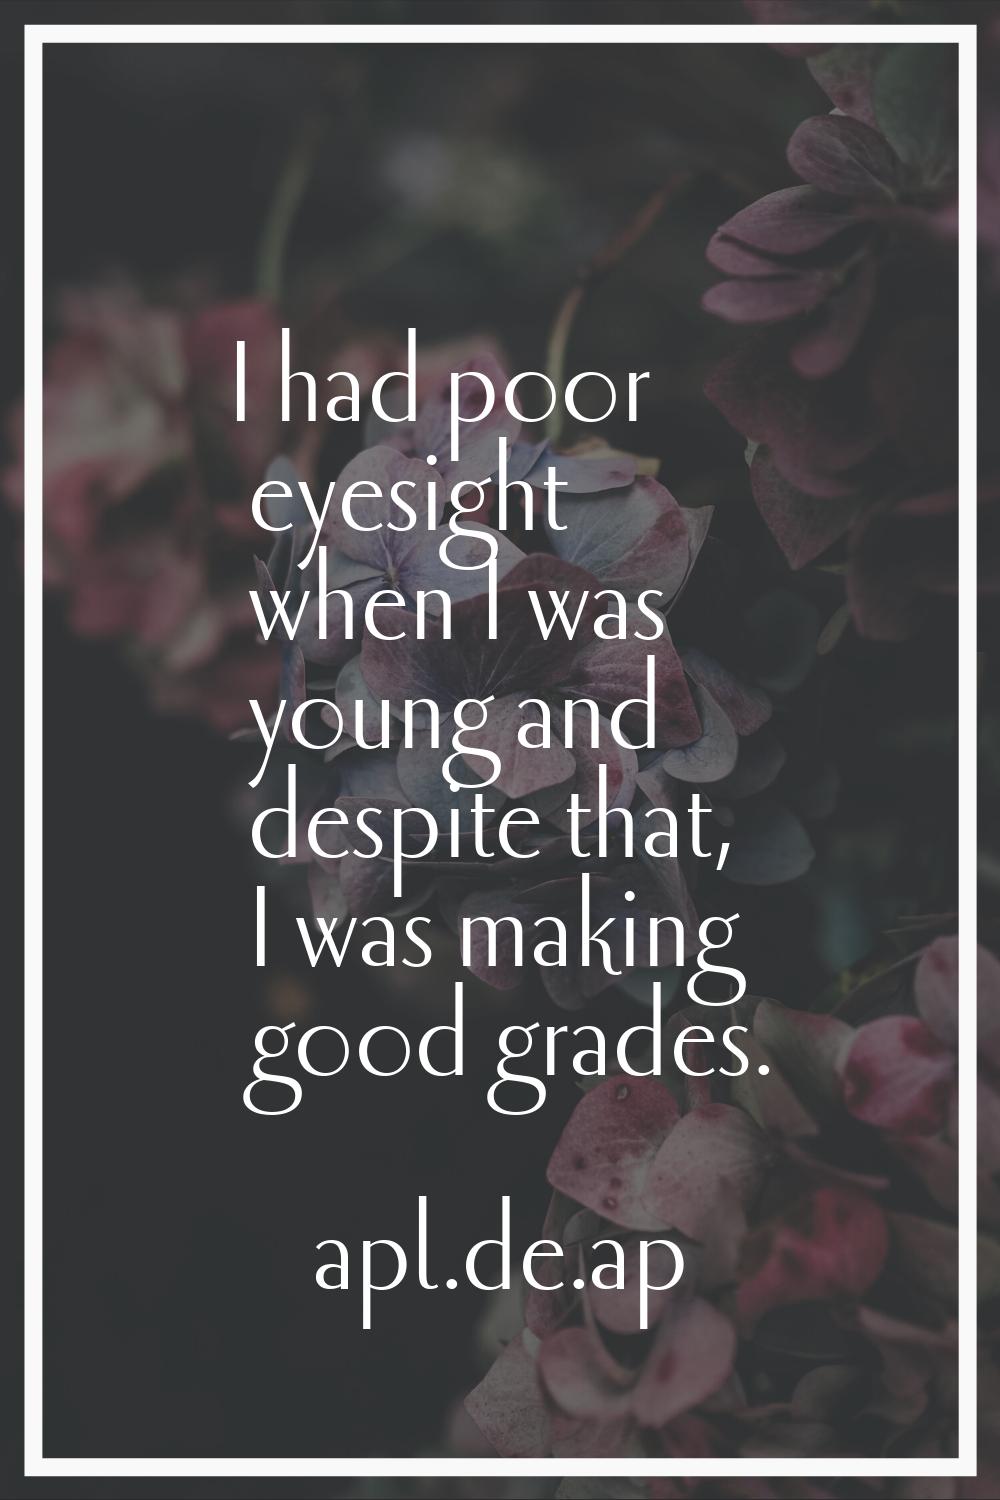 I had poor eyesight when I was young and despite that, I was making good grades.